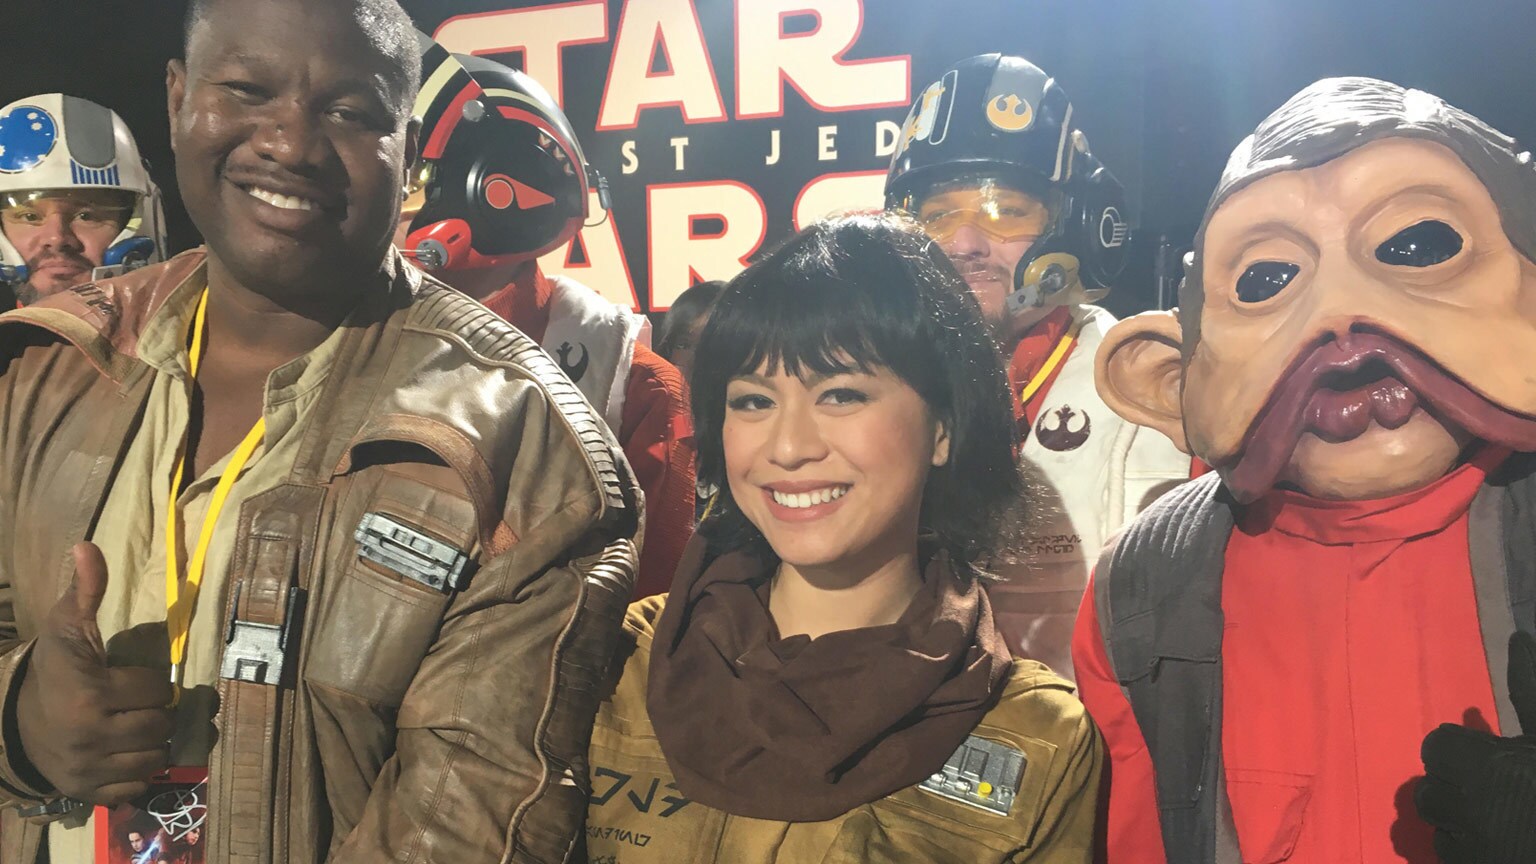 These Star Wars: The Last Jedi Cosplayers from the Red Carpet Premiere Are Most Impressive